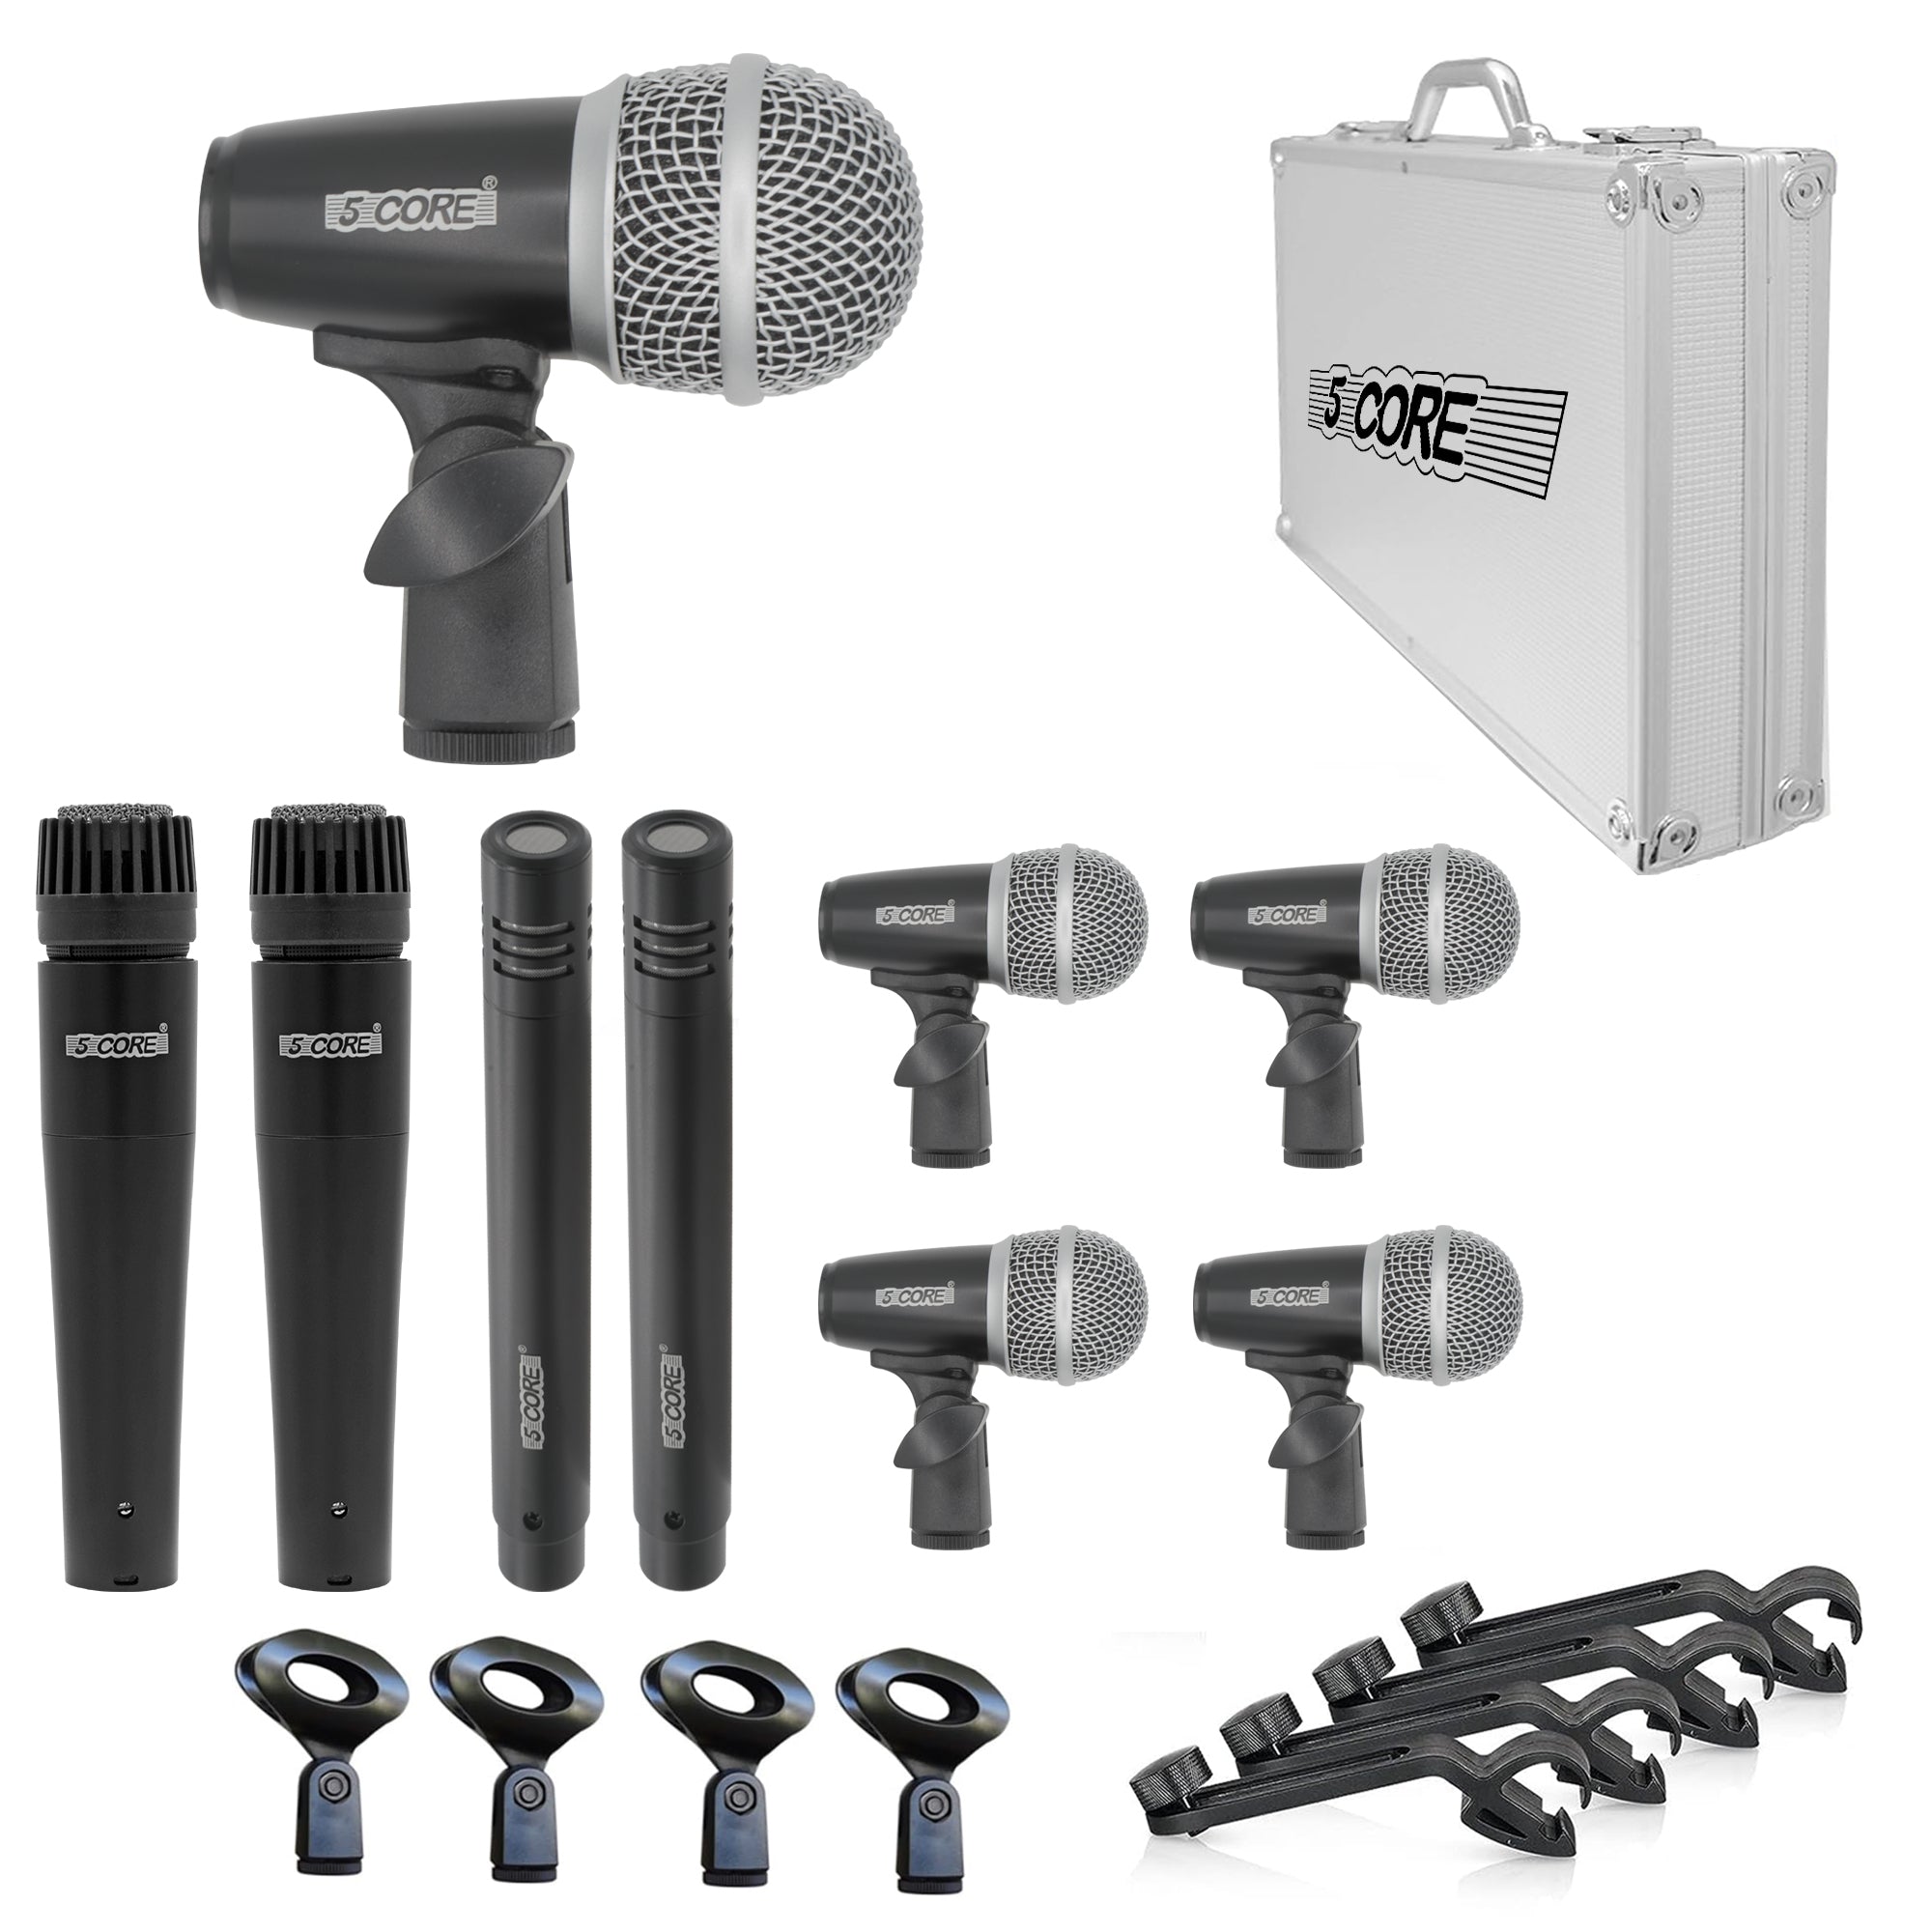 5 Core Drum Microphone Kit 9 Piece Wired Full Metal Dynamic Wired drums Mic Set for Drummers w/ Kick Bass Tom Snare + Silver Carrying Case Sponge & Thread Holder for Vocal & Other Instrument - DM 9RND BLK